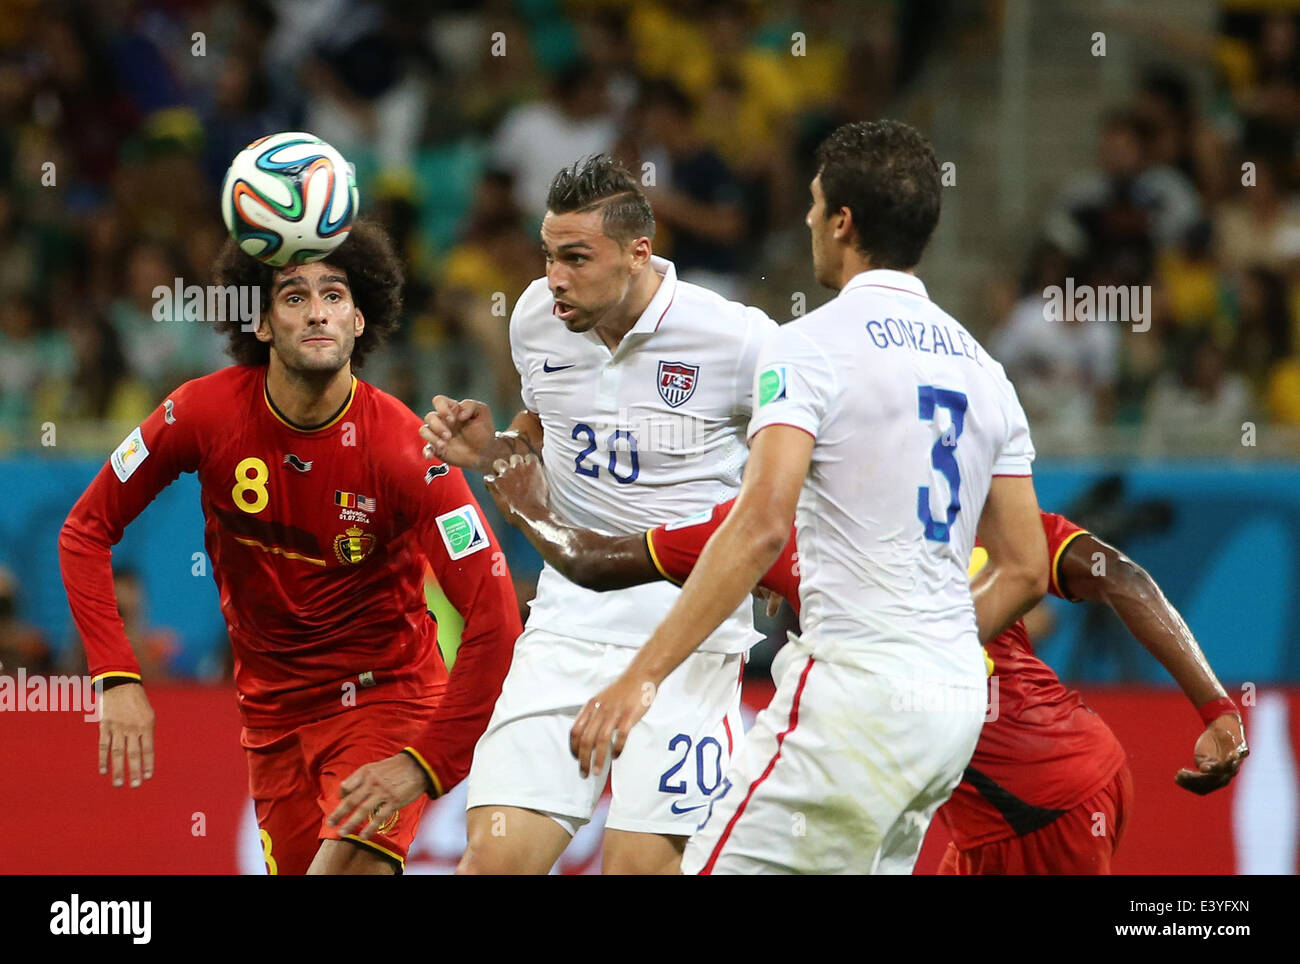 Salvador, Brazil. 1st July, 2014. Belgium's Marouane Fellaini (L) vies with Geoff Cameron (C) of the U.S. during a Round of 16 match between Belgium and the U.S. of 2014 FIFA World Cup at the Arena Fonte Nova Stadium in Salvador, Brazil, on July 1, 2014. Credit:  Cao Can/Xinhua/Alamy Live News Stock Photo